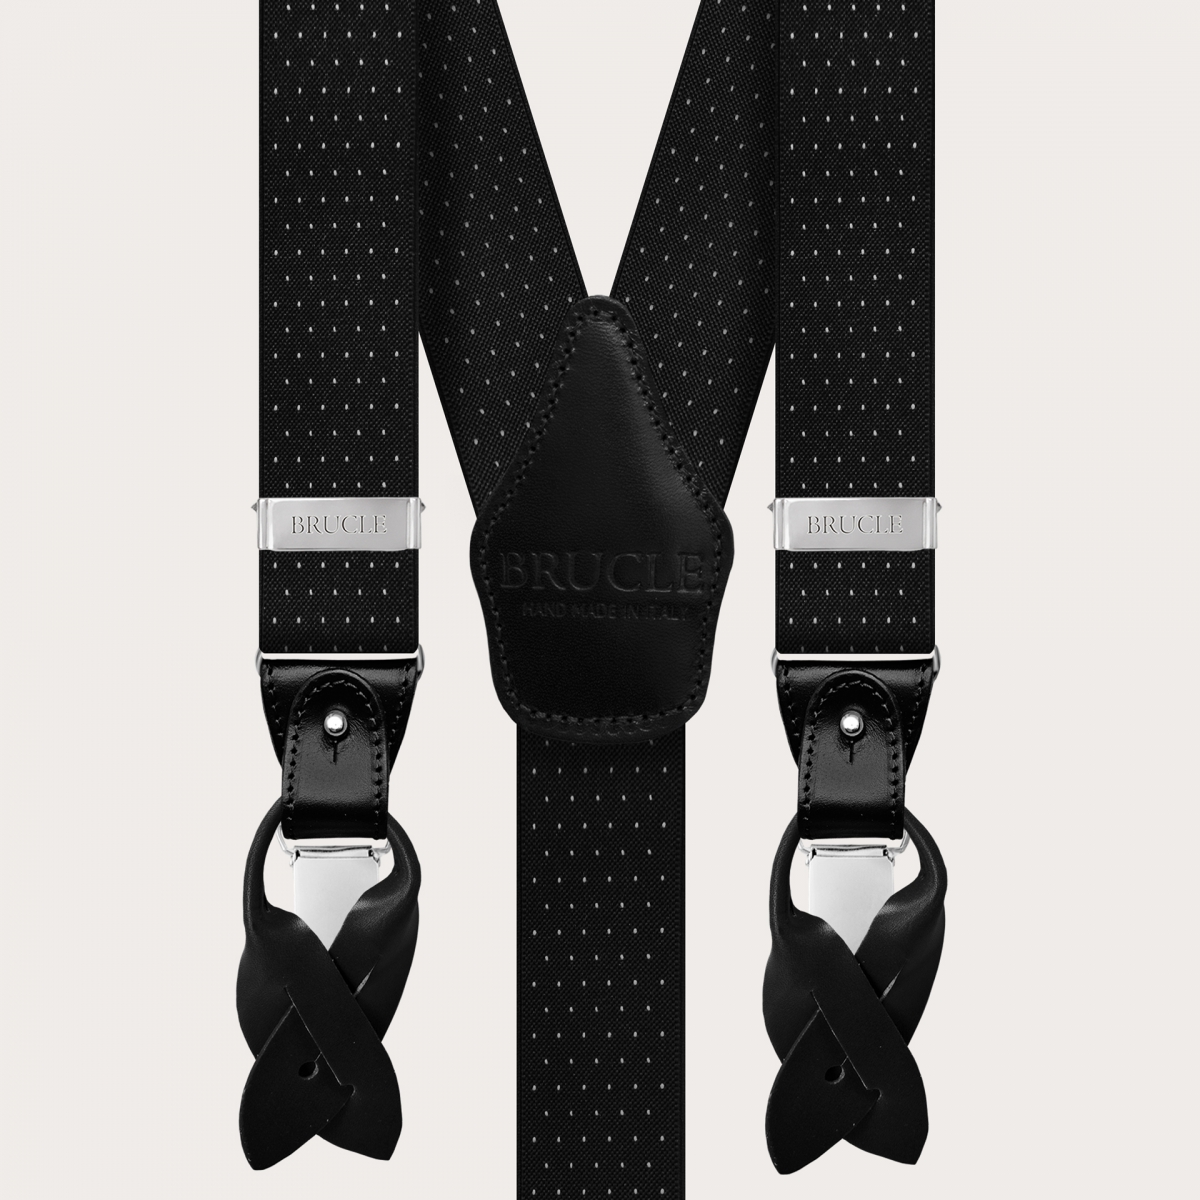 BRUCLE Y-shape black elastic suspenders with dotted pattern